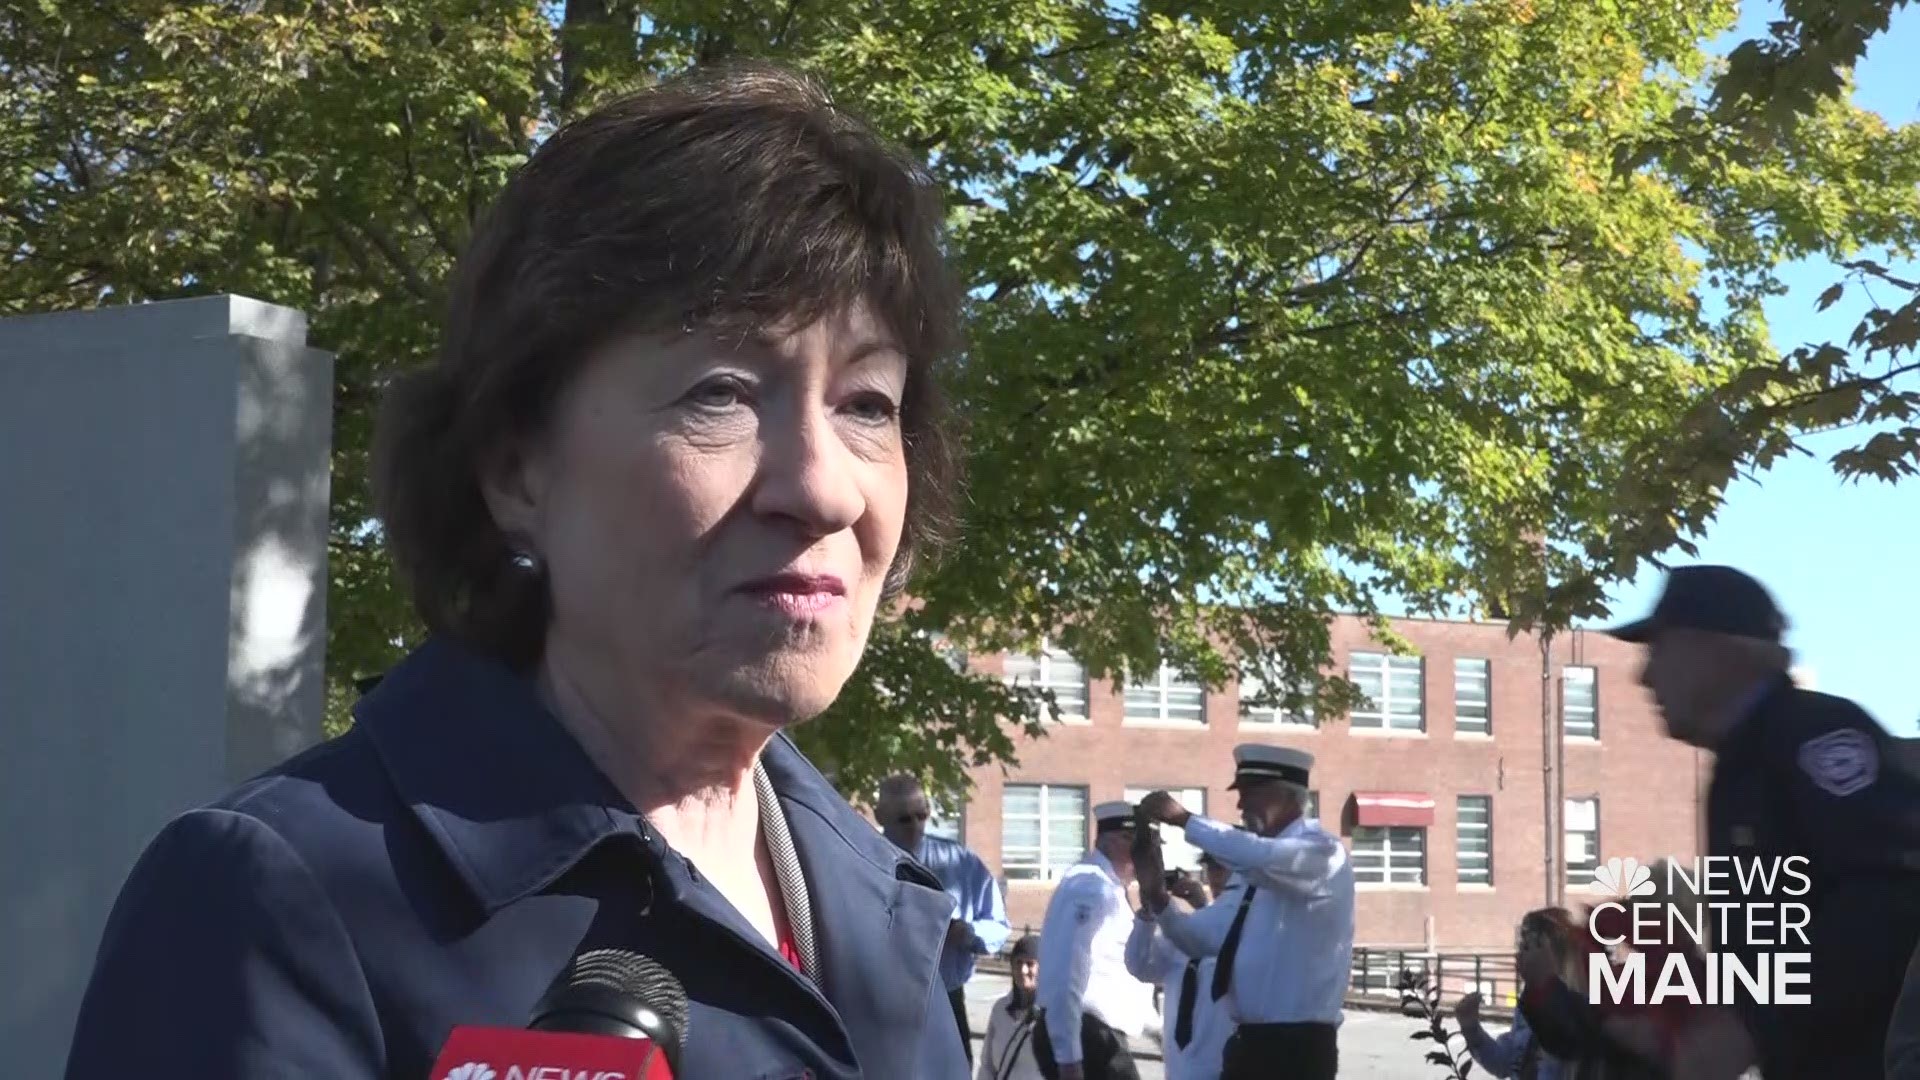 Sen. Susan Collins weighs in on President Trump's call for foreign investigations on former VP Joe Biden and son.